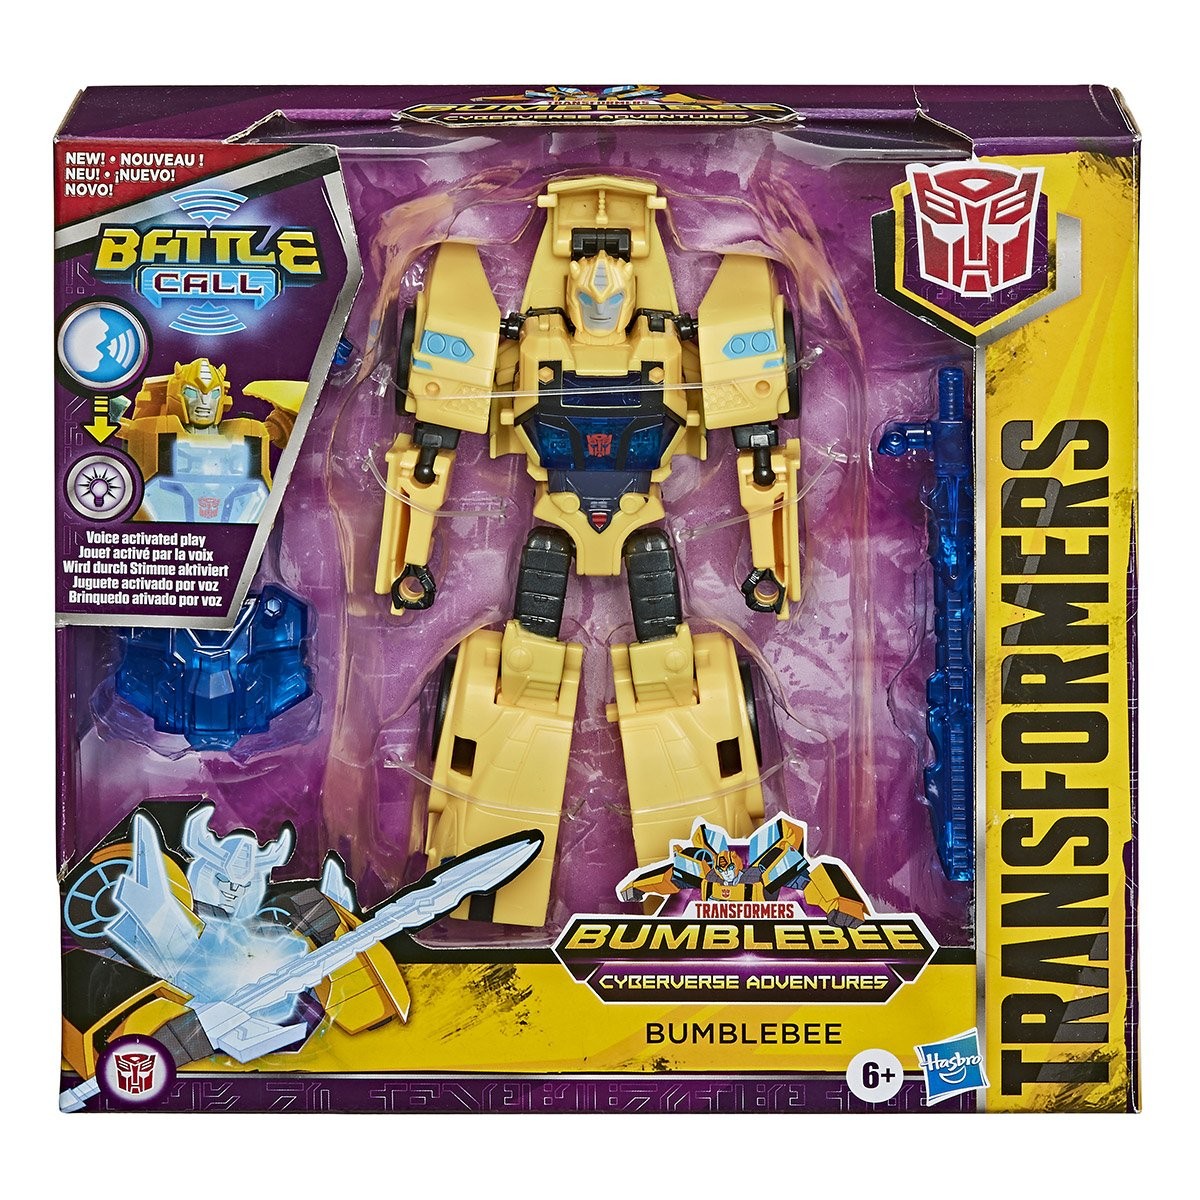 TRANSFORMERS BUMBLEBEE LUMINEUX SONORE 50 CM x 20CM